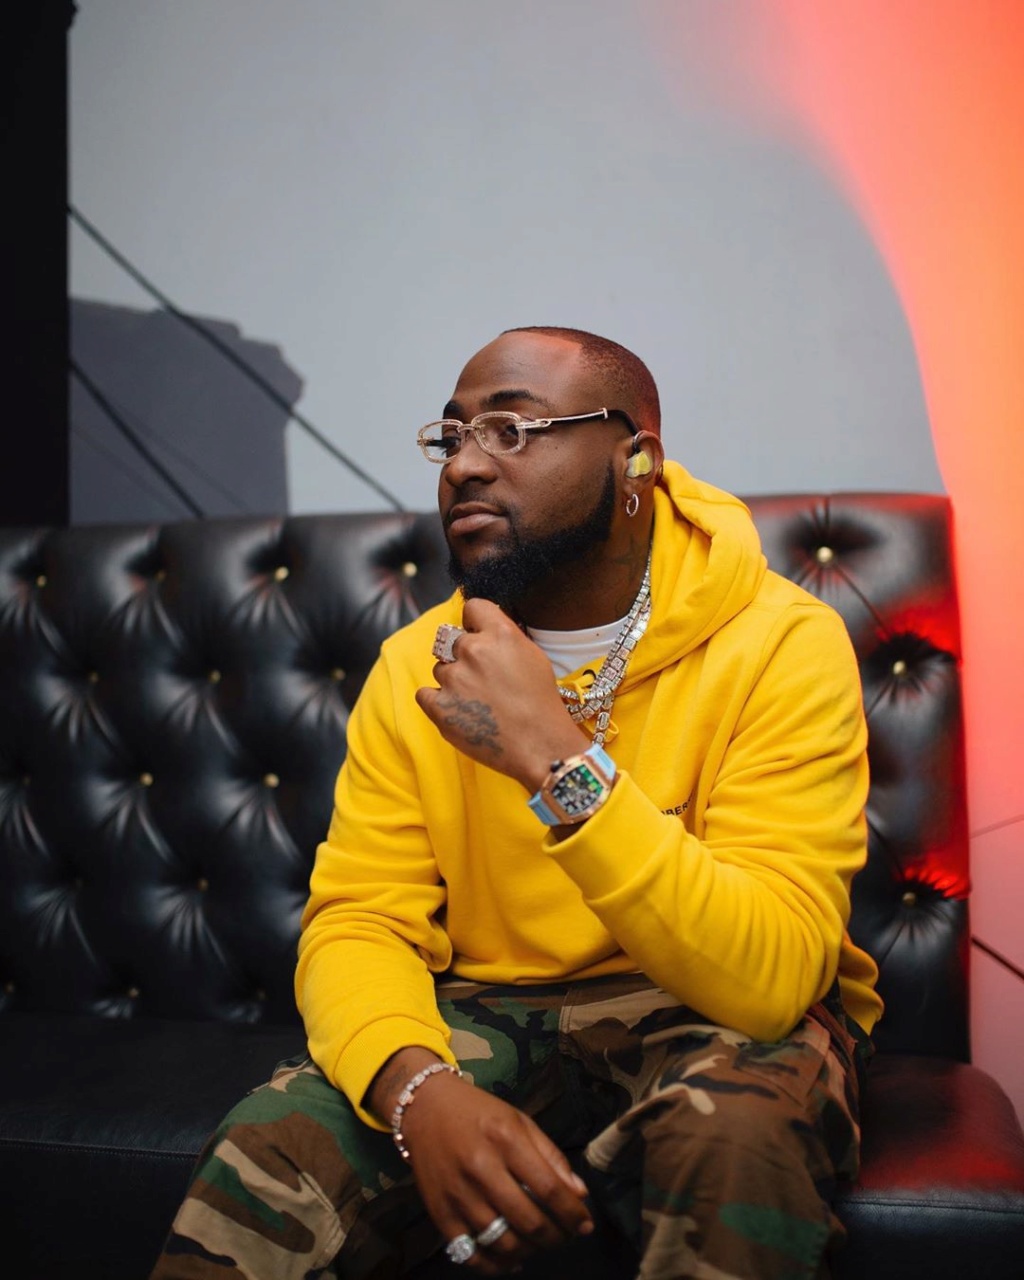 davido - Davido Reveals Future Plan For Music Industry After Releasing His First Song 9 Years Ago David343